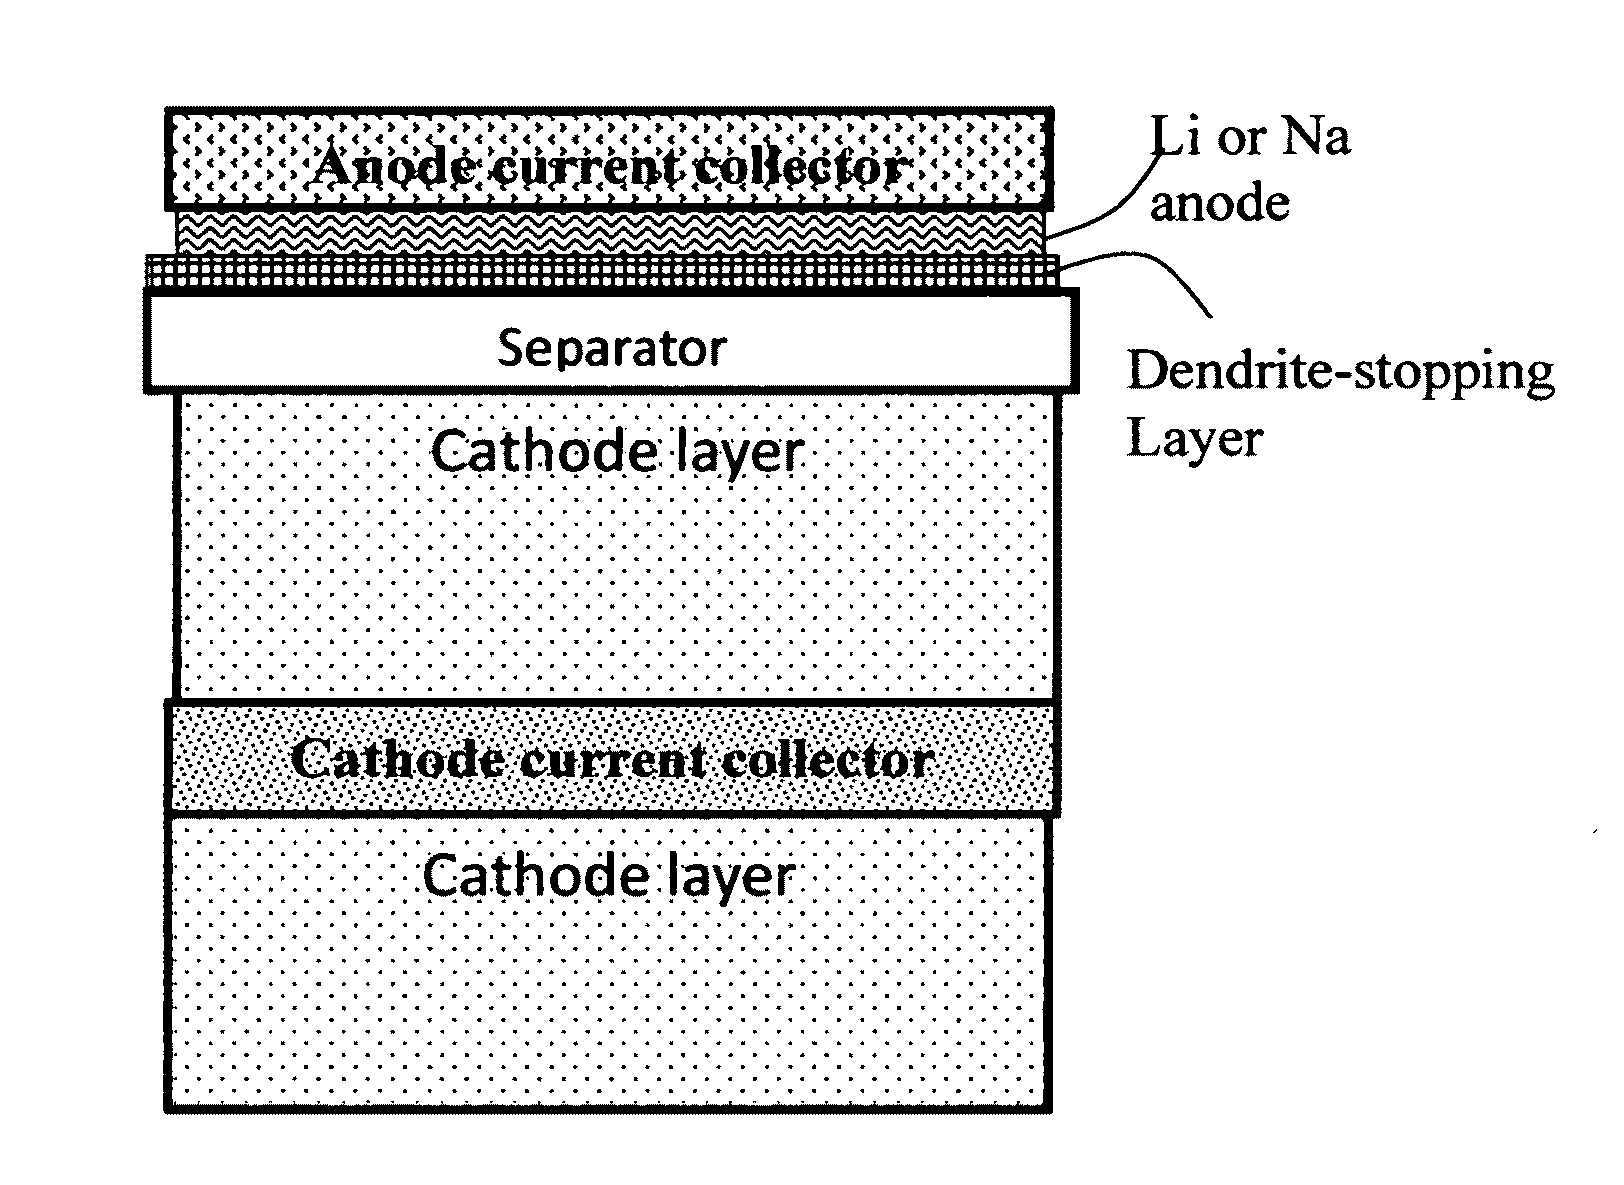 Carbon matrix-and carbon matrix composite-based dendrite-Intercepting layer for alkali metal secondary battery